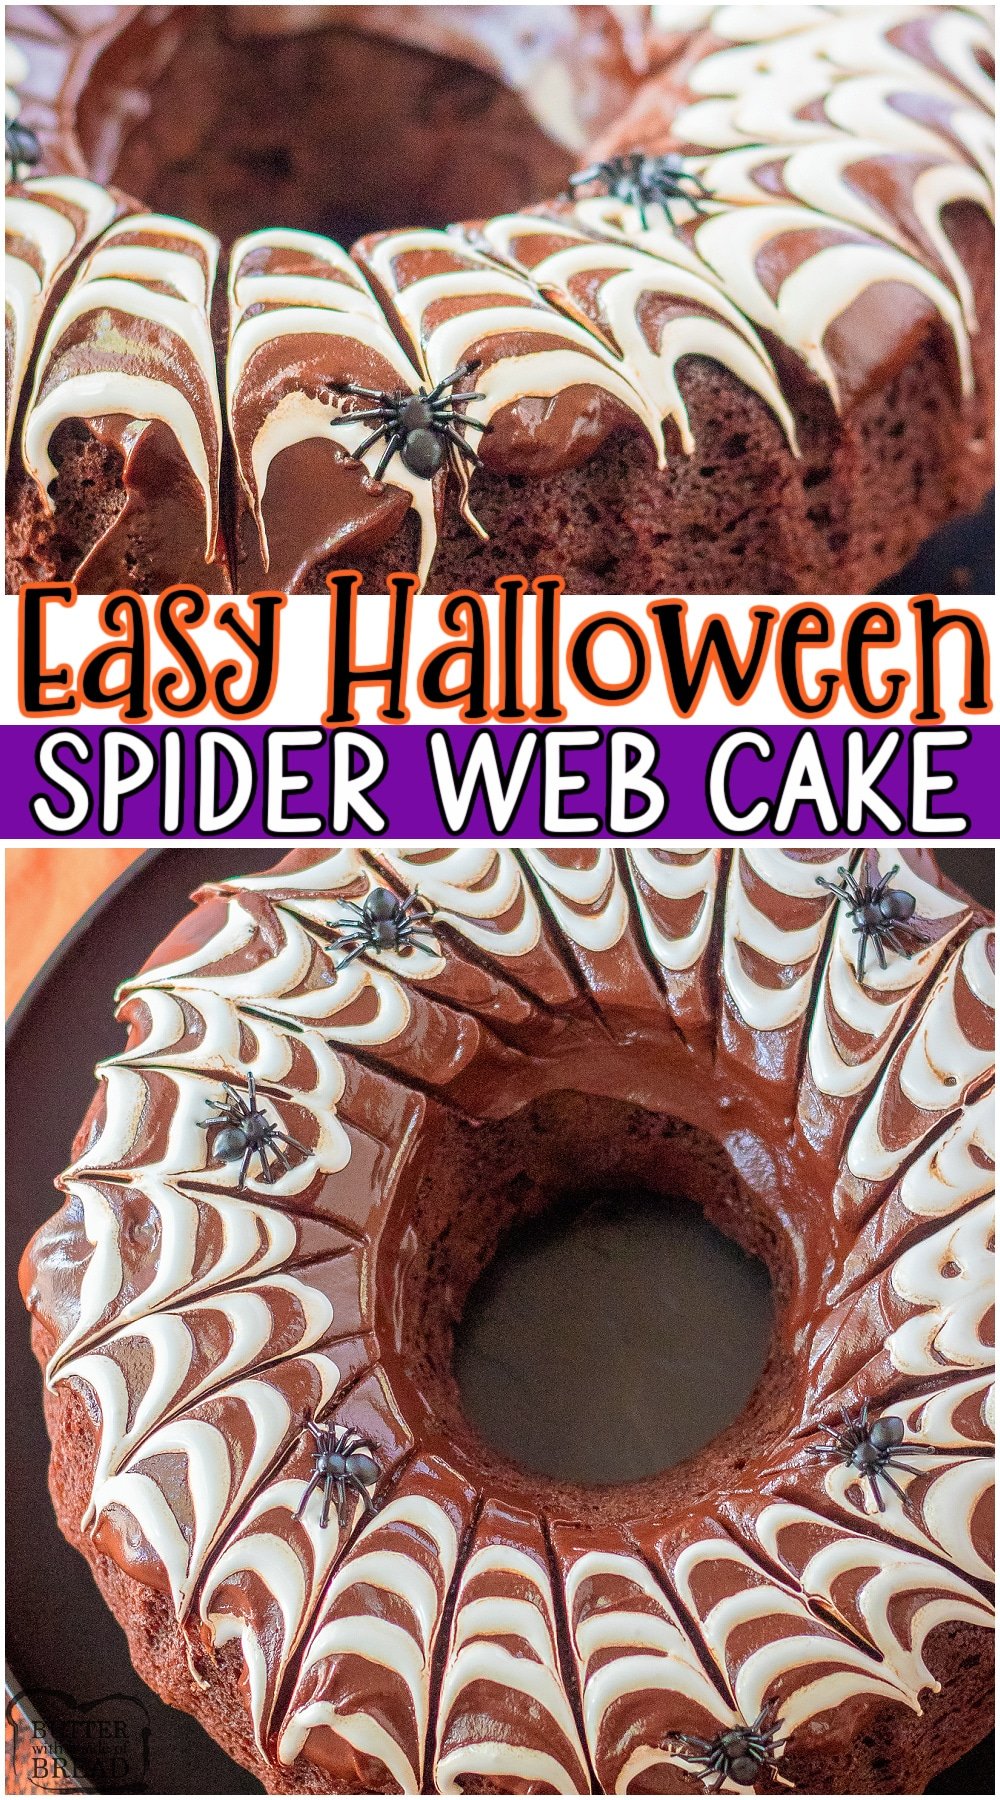 Spider web cake is the perfect Halloween treat! Homemade chocolate cake covered in a rich chocolate ganache with marshmallow fluff cobwebs that are so simple to make! Fun & festive, slightly creepy cake that everyone loves. #cake #spiderweb #Halloween #chocolate #easyrecipe from BUTTER WITH A SIDE OF BREAD